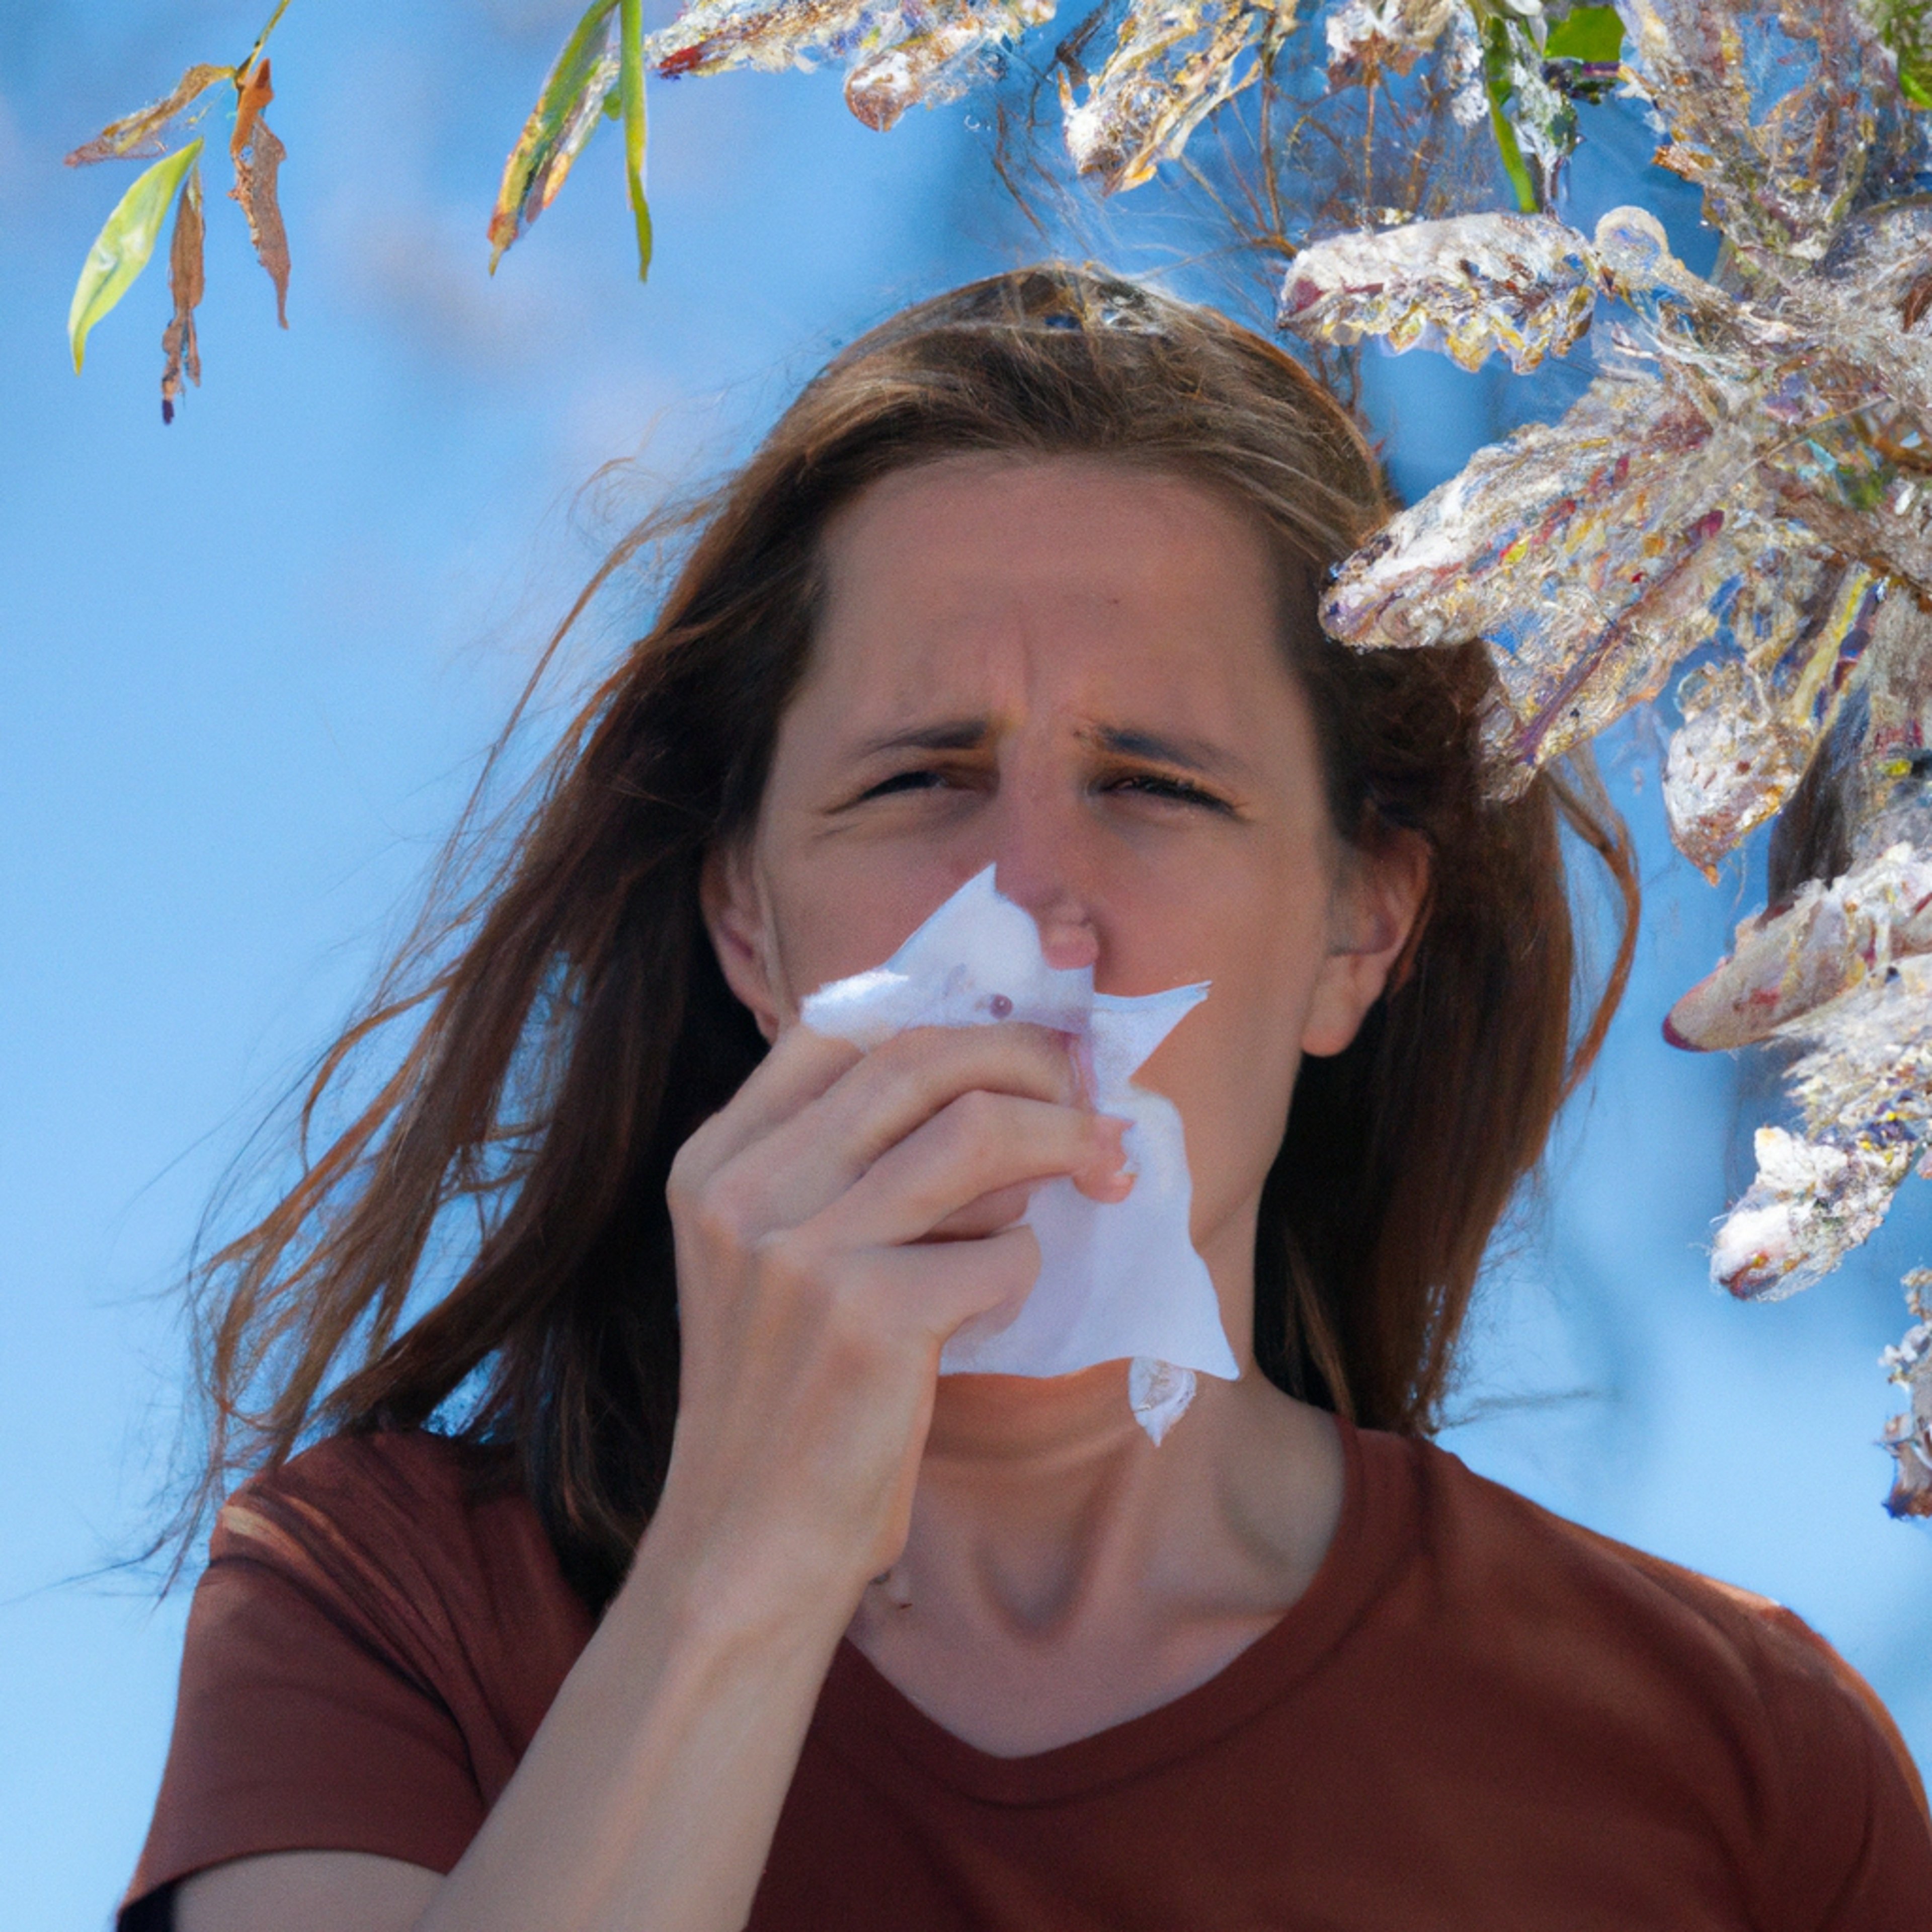 Allergists Share How Climate Change is Affecting Allergies, What You Can Do to Curb the Suffering